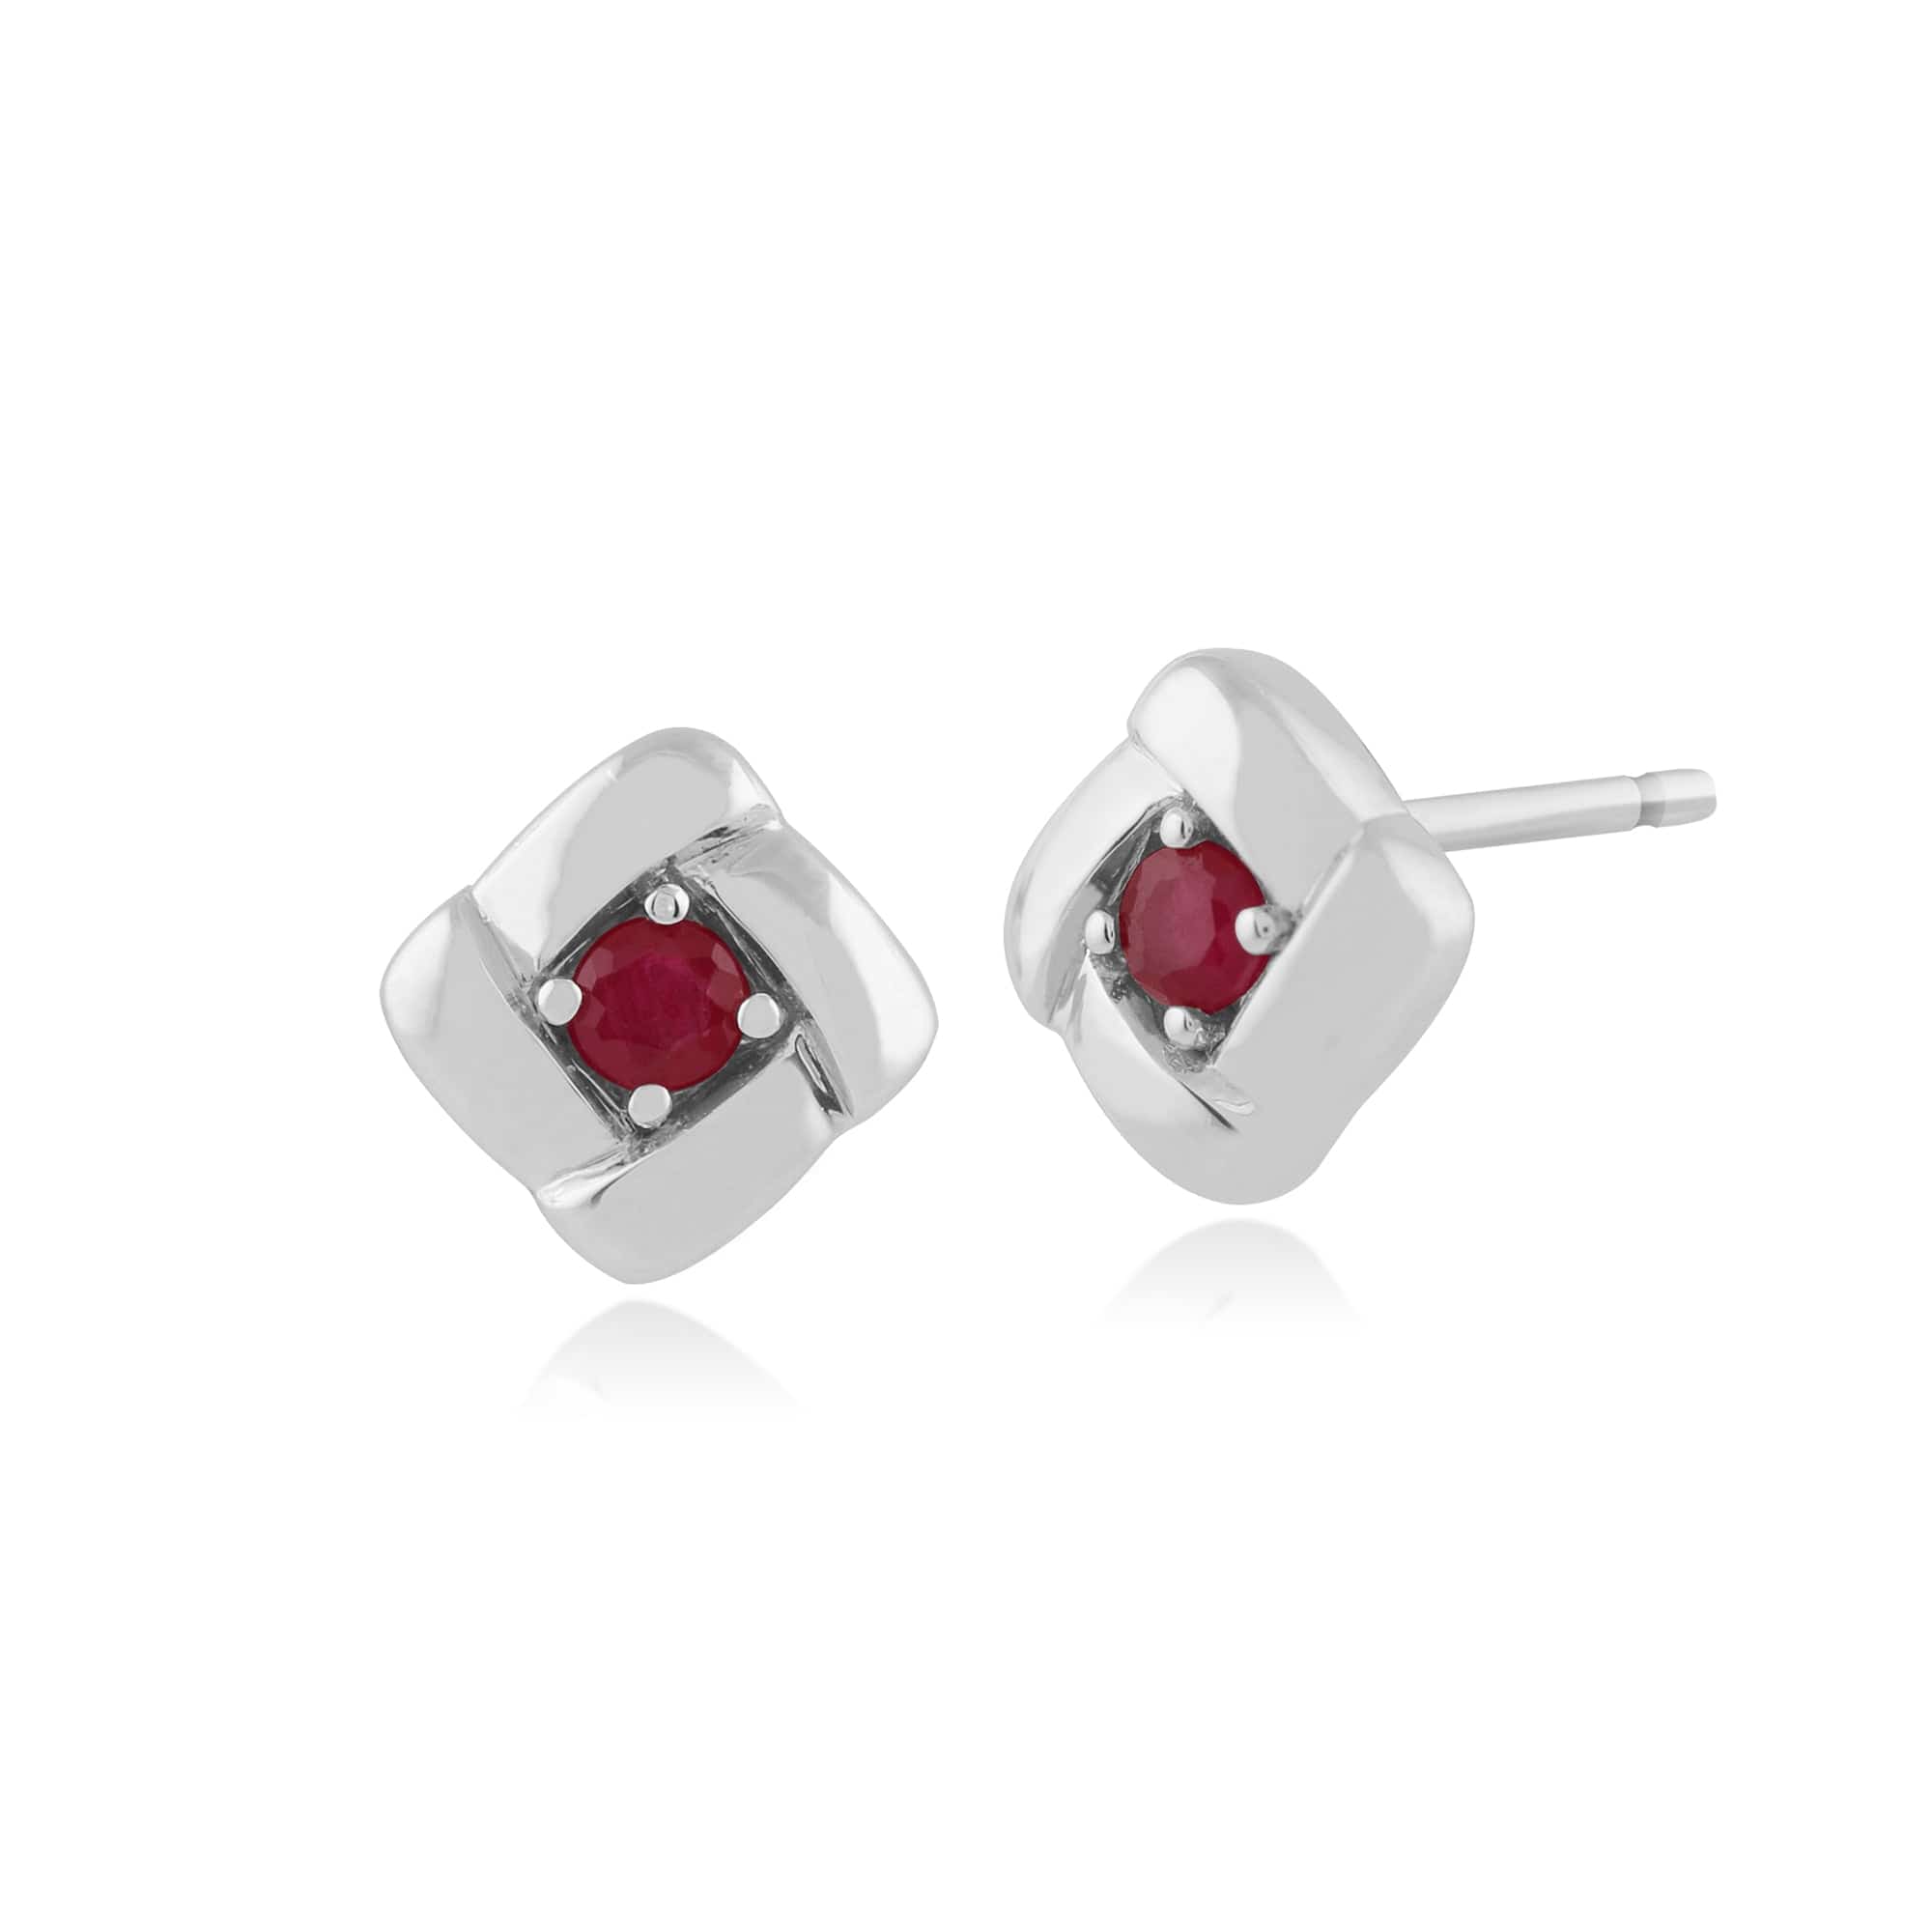 Classic Ruby Square Crossover Stud Earrings in Sterling Silver - Gemondo